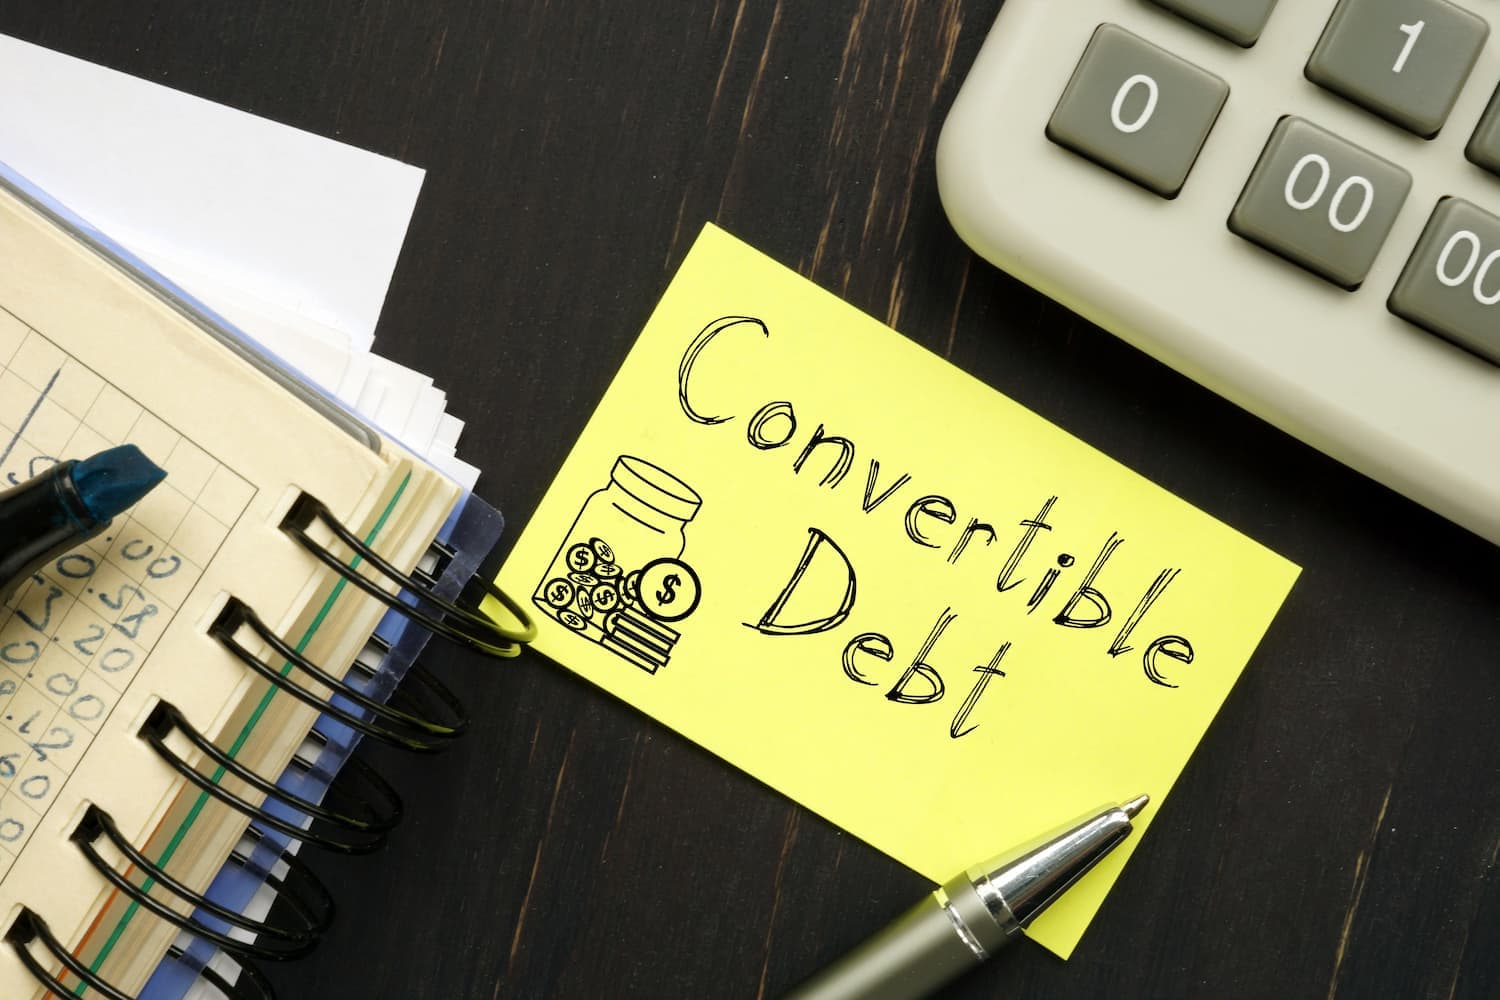 What Startups and Key Investors in Thailand Should Know about Alternative Debt Financing